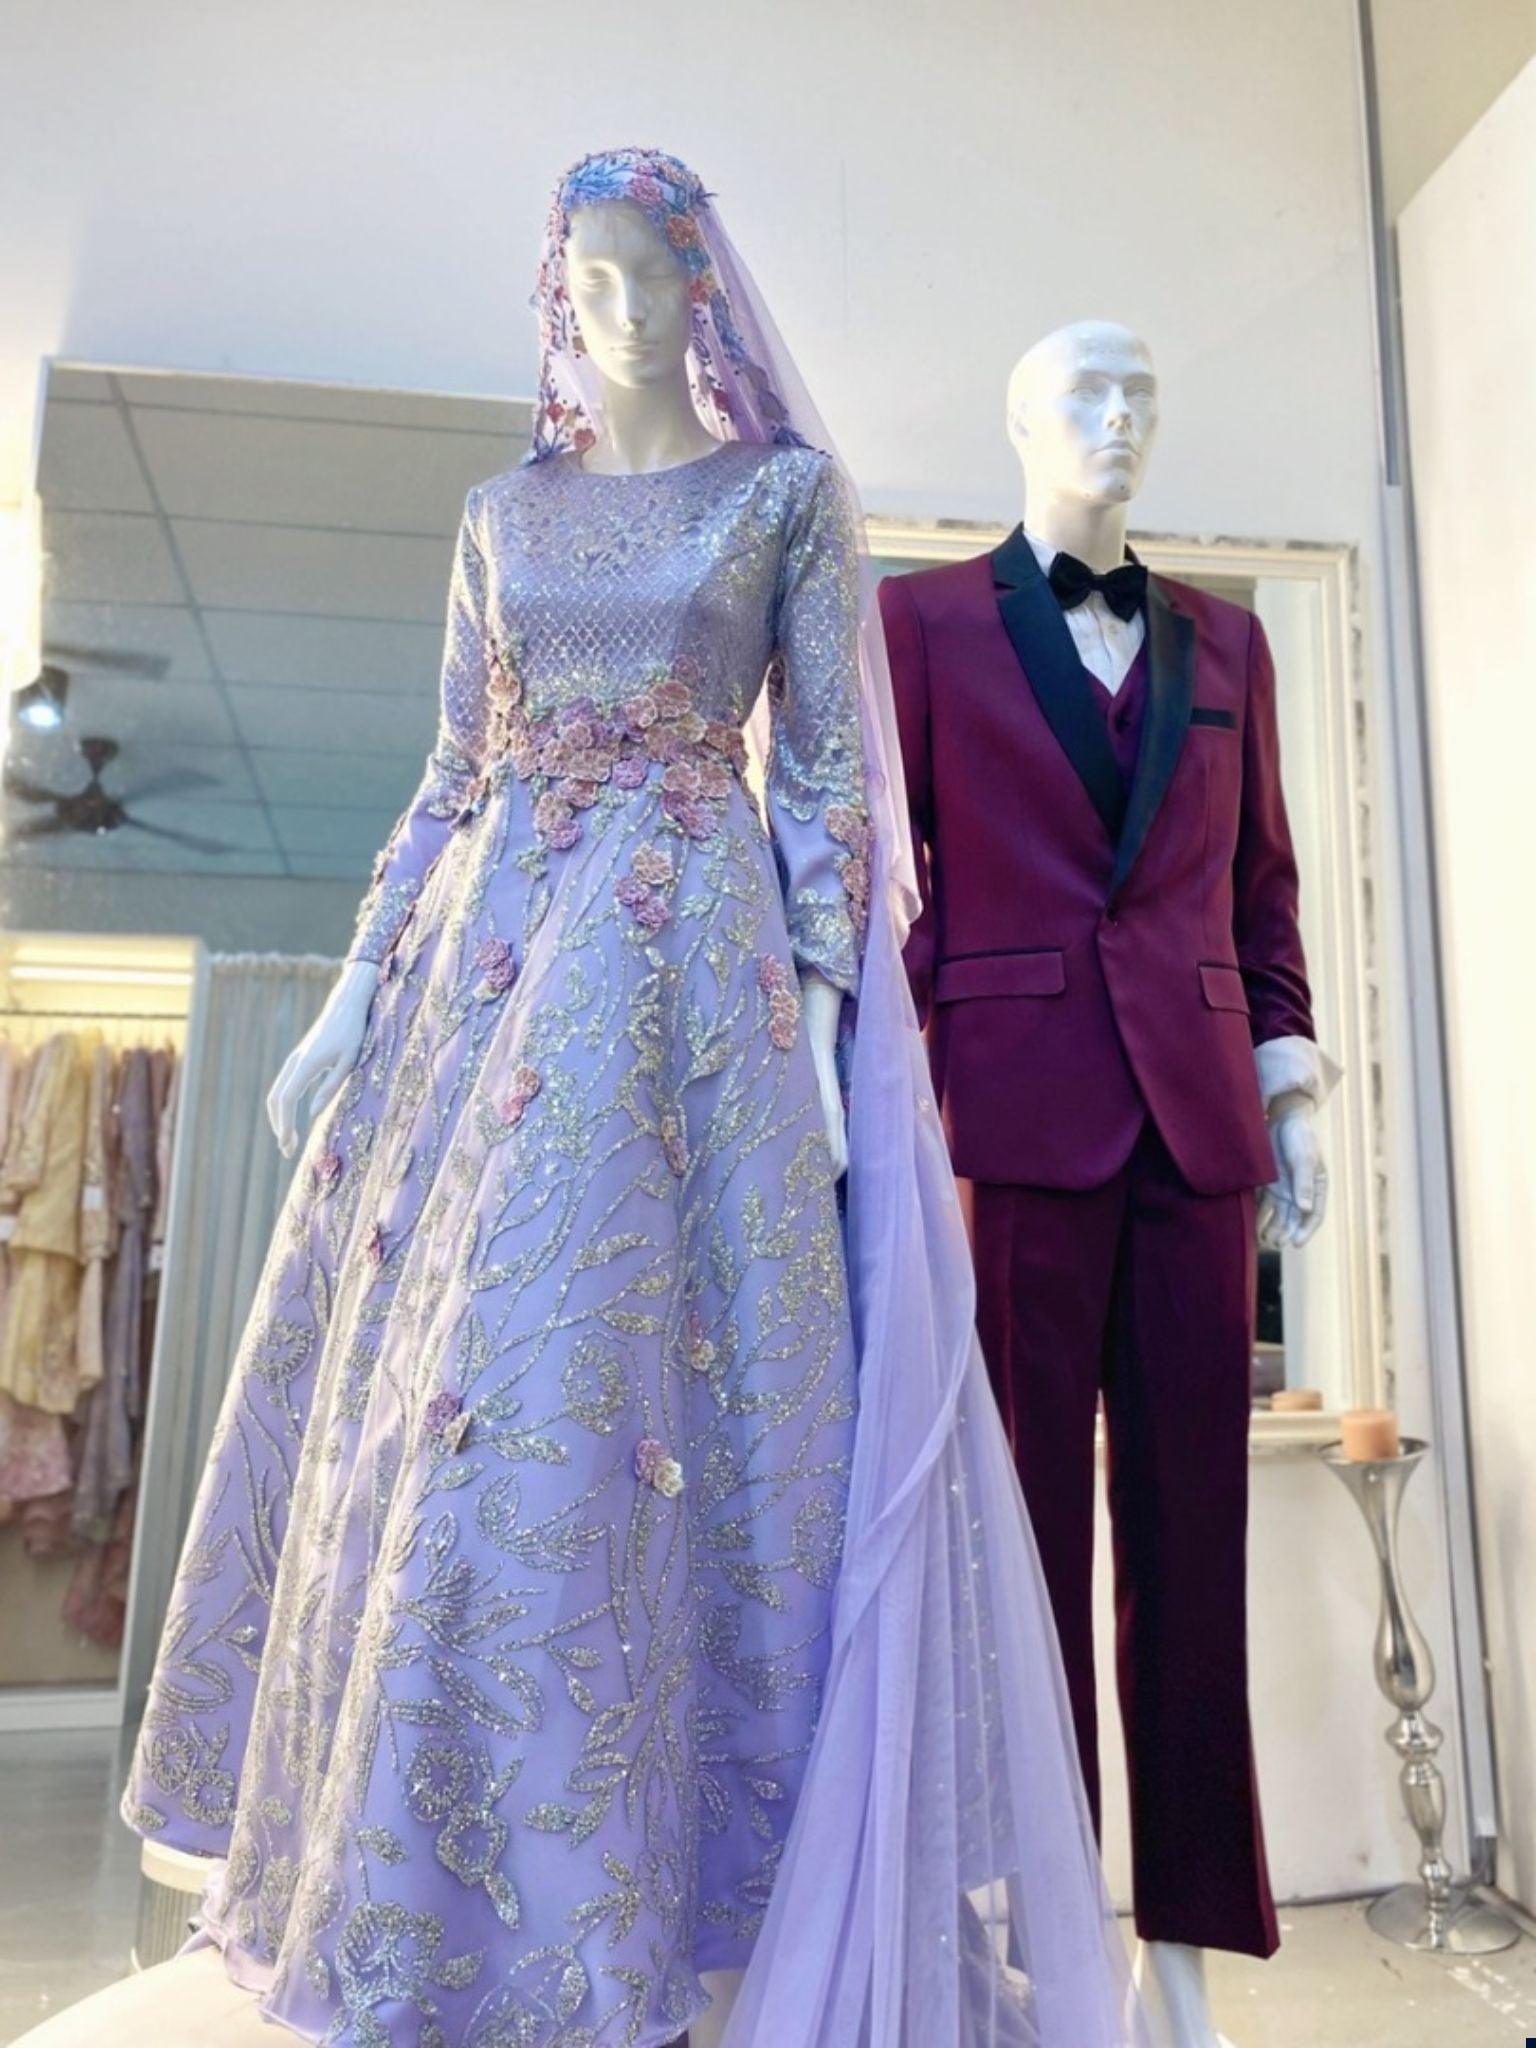 You'll love The PERIWINKLE Purple Silver Duchess with Glitter Lace Ball Gown Wedding Dress from PP Signature Bridal. Rent online or book an appointment today!